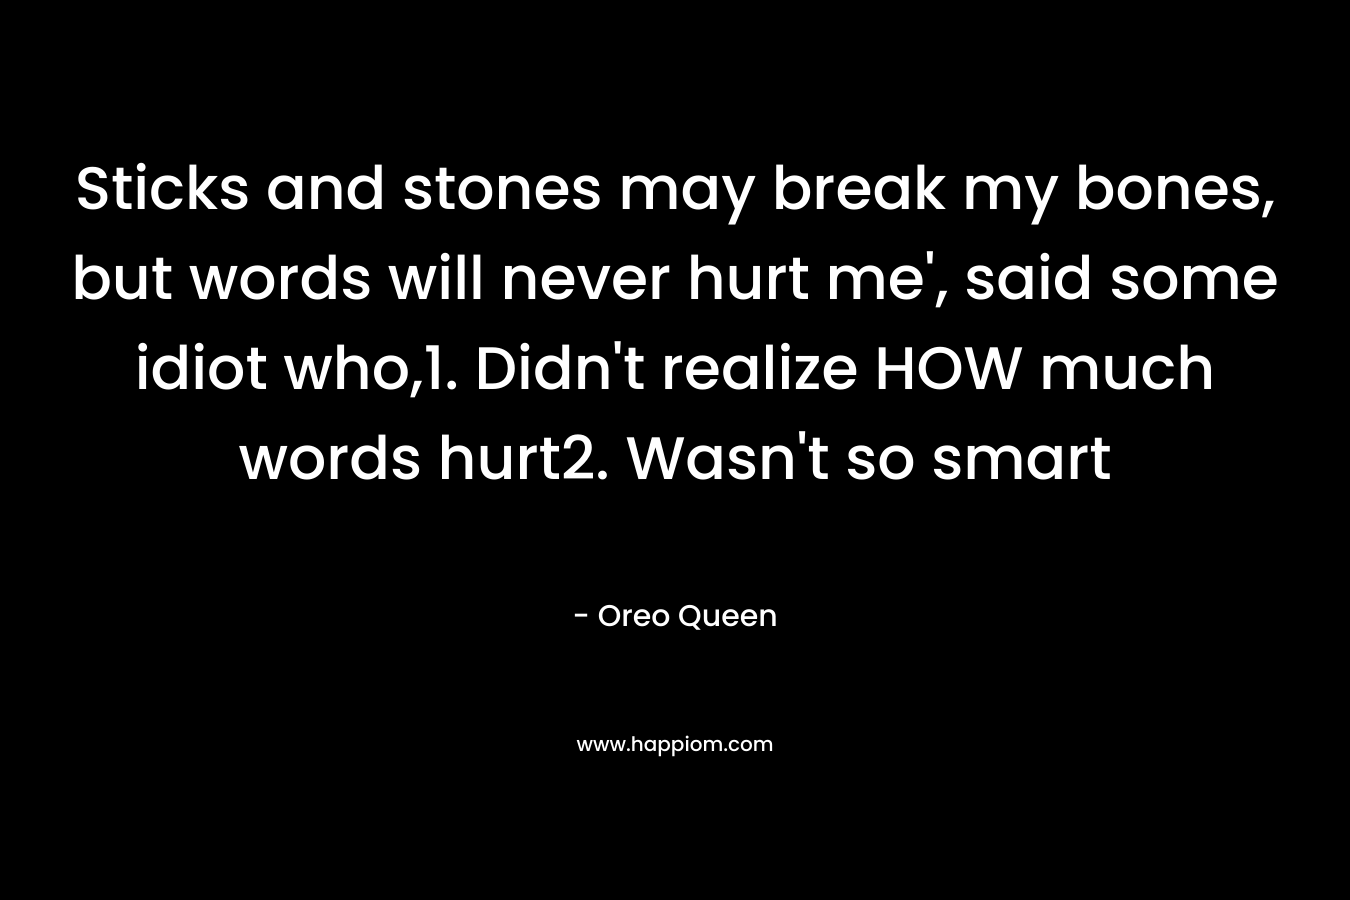 Sticks and stones may break my bones, but words will never hurt me', said some idiot who,1. Didn't realize HOW much words hurt2. Wasn't so smart